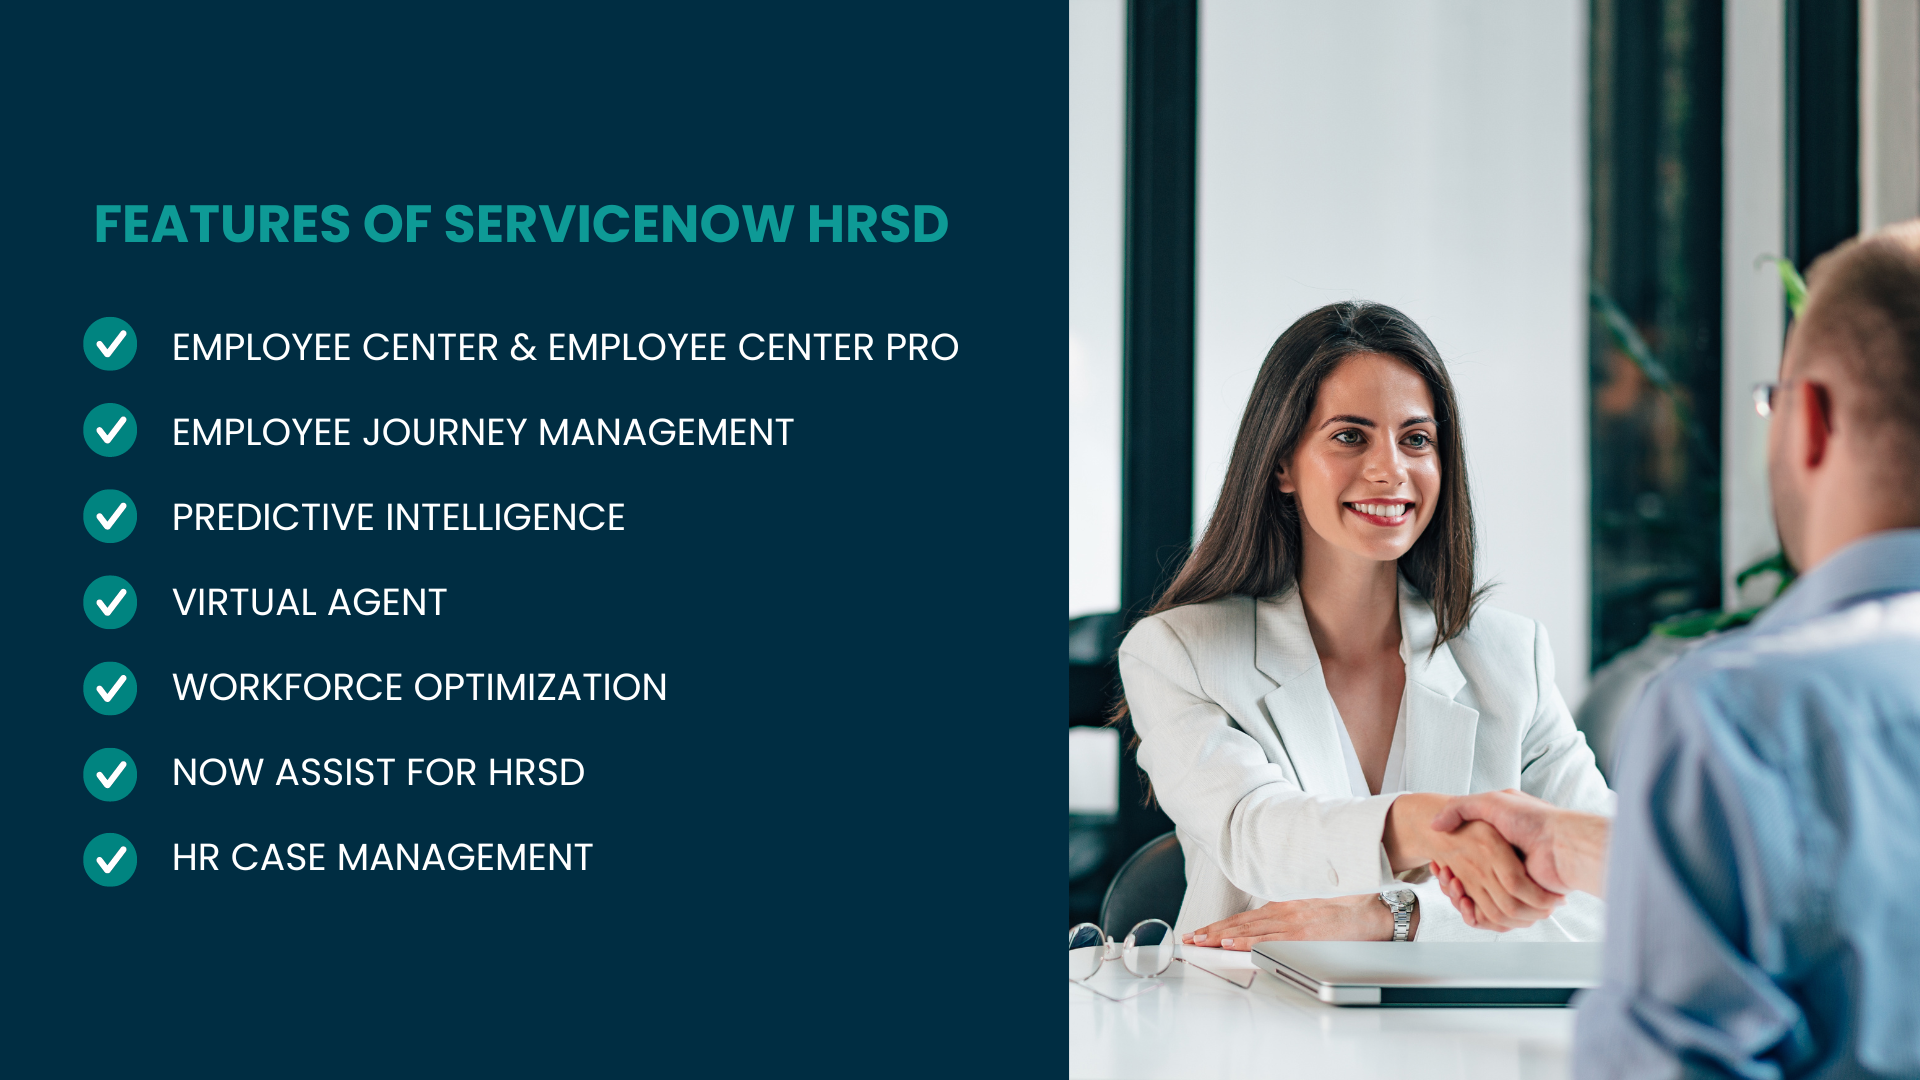 Feature Of ServiceNow HRSD